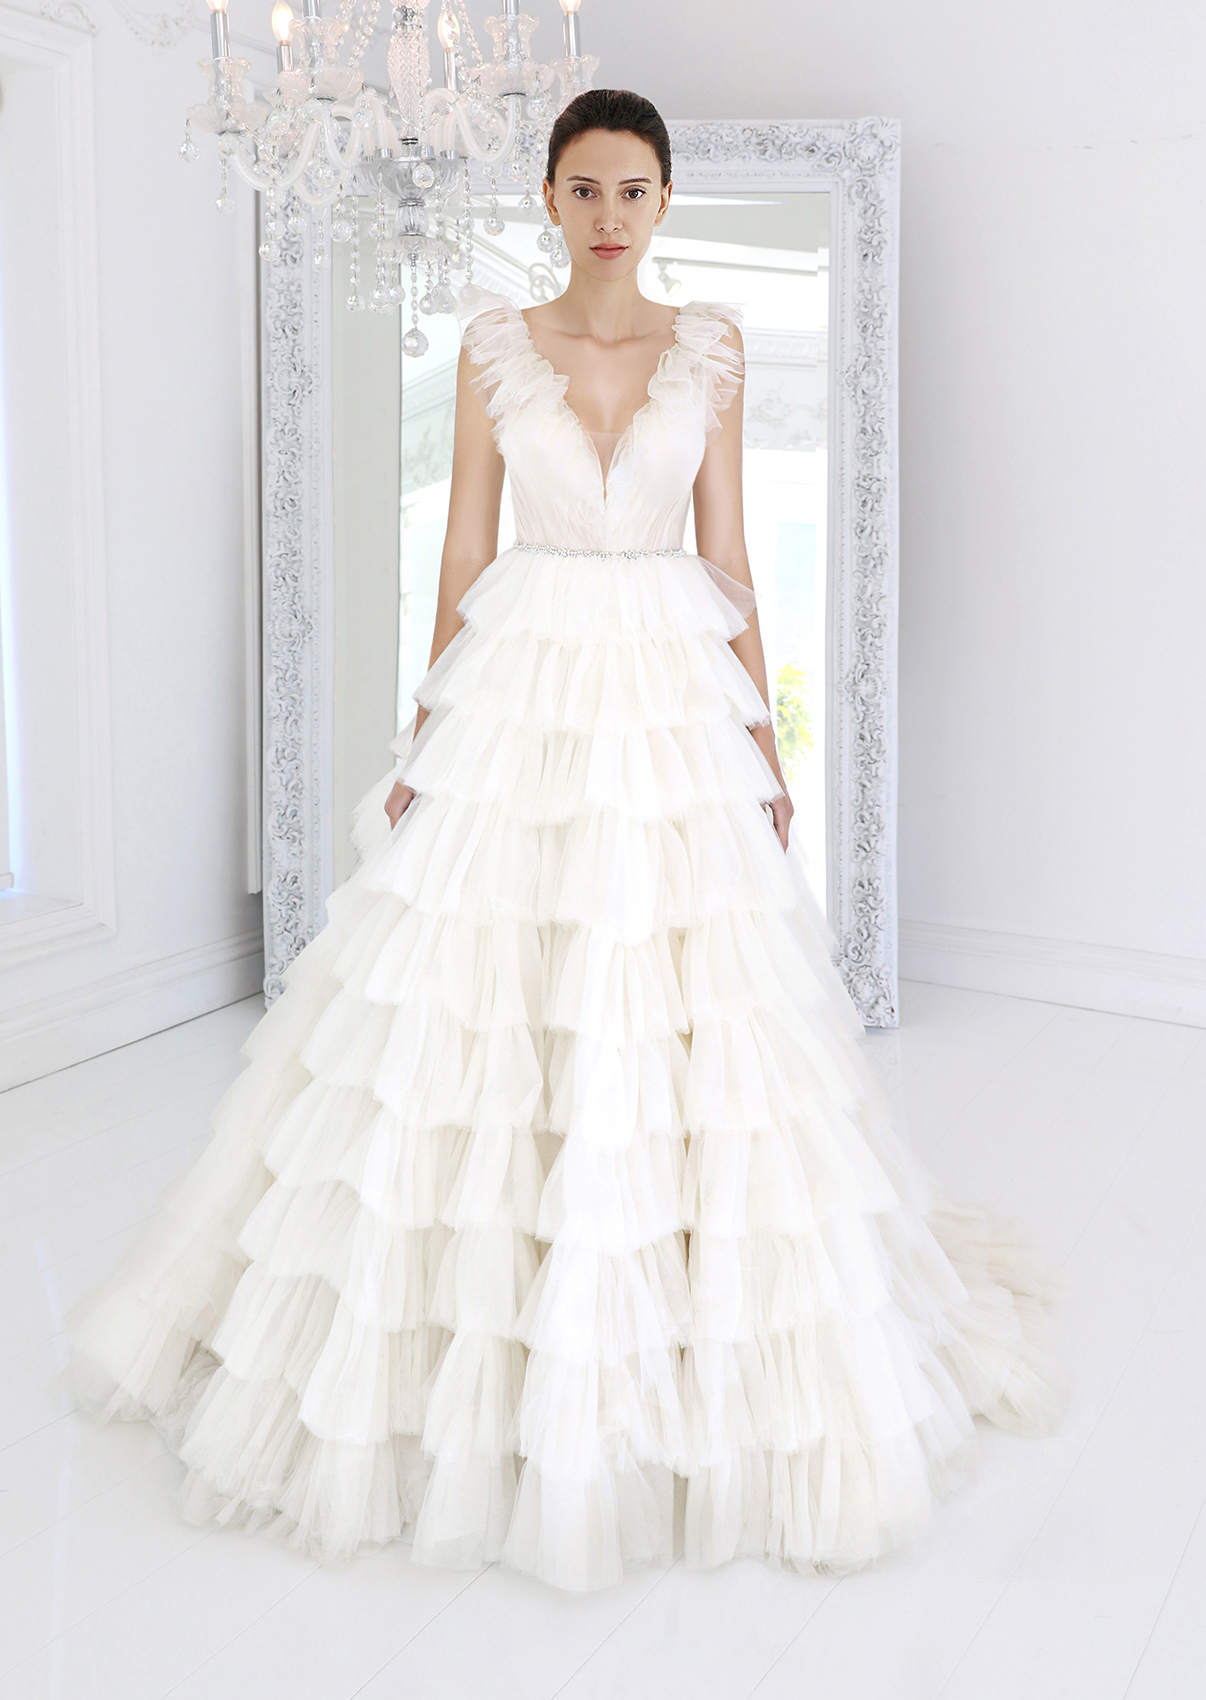 The Elegance of White Silk Wedding Dresses: A Winnie Couture Collection